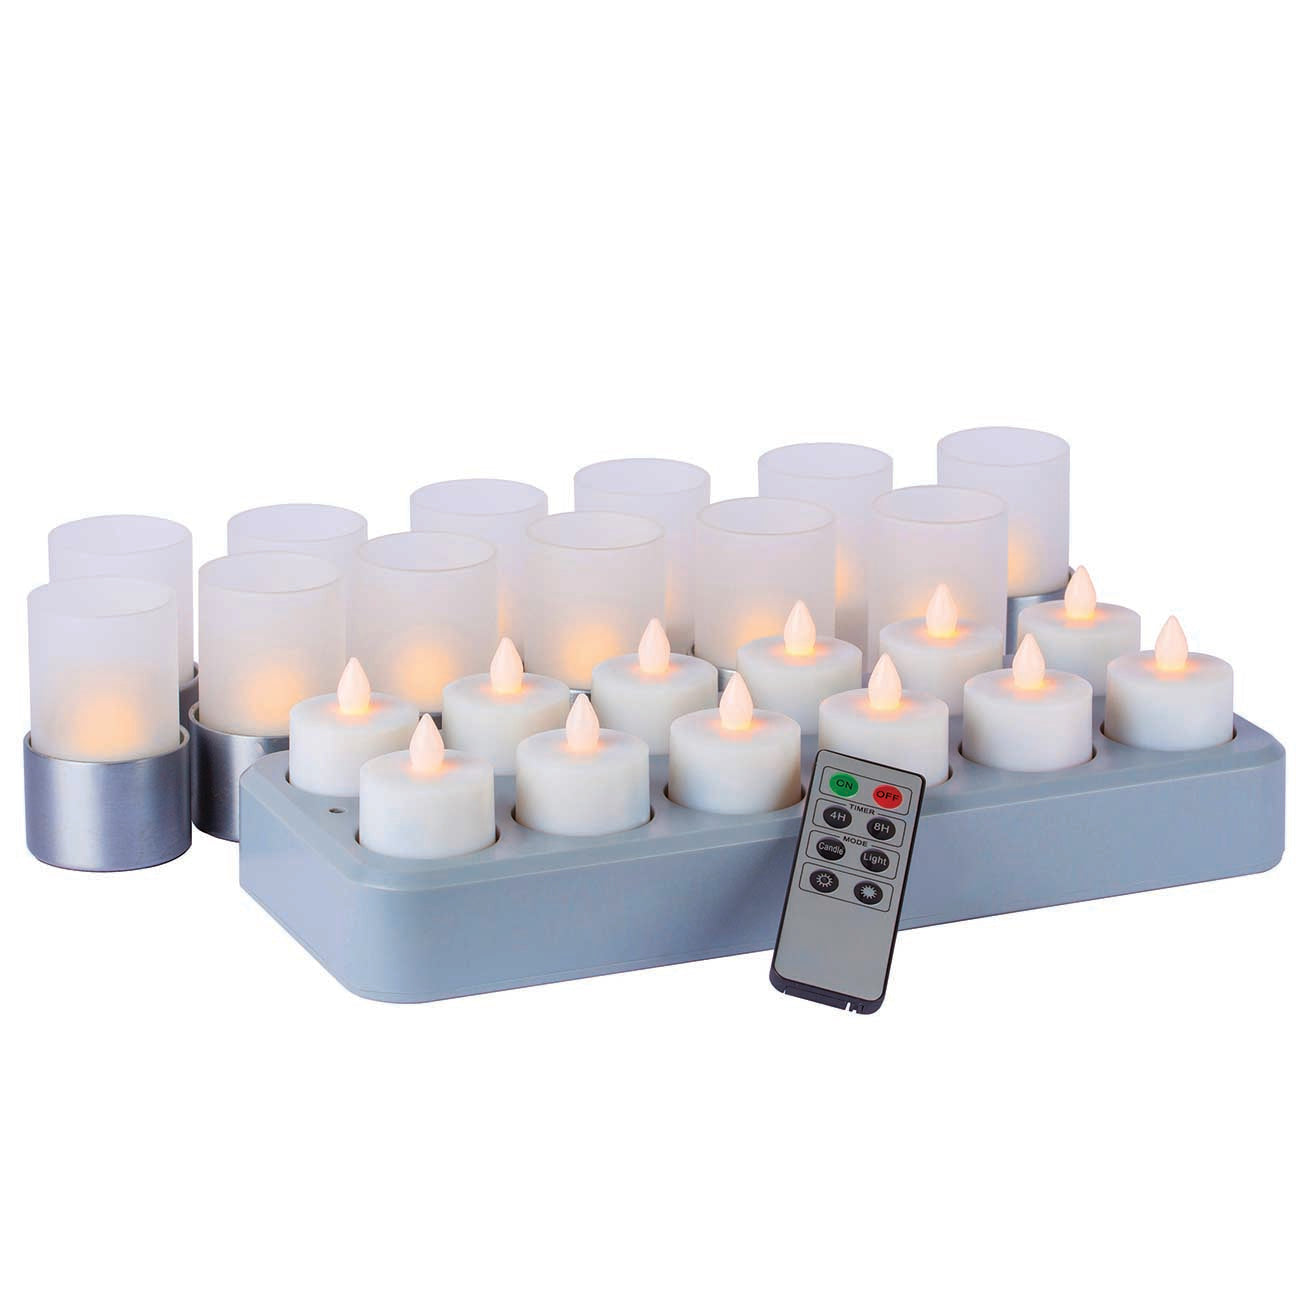 Remote Controlled set of 12 Rechargeable LED Flicker Tealights in Candlelight Colour with Frosted Ambeo lamps